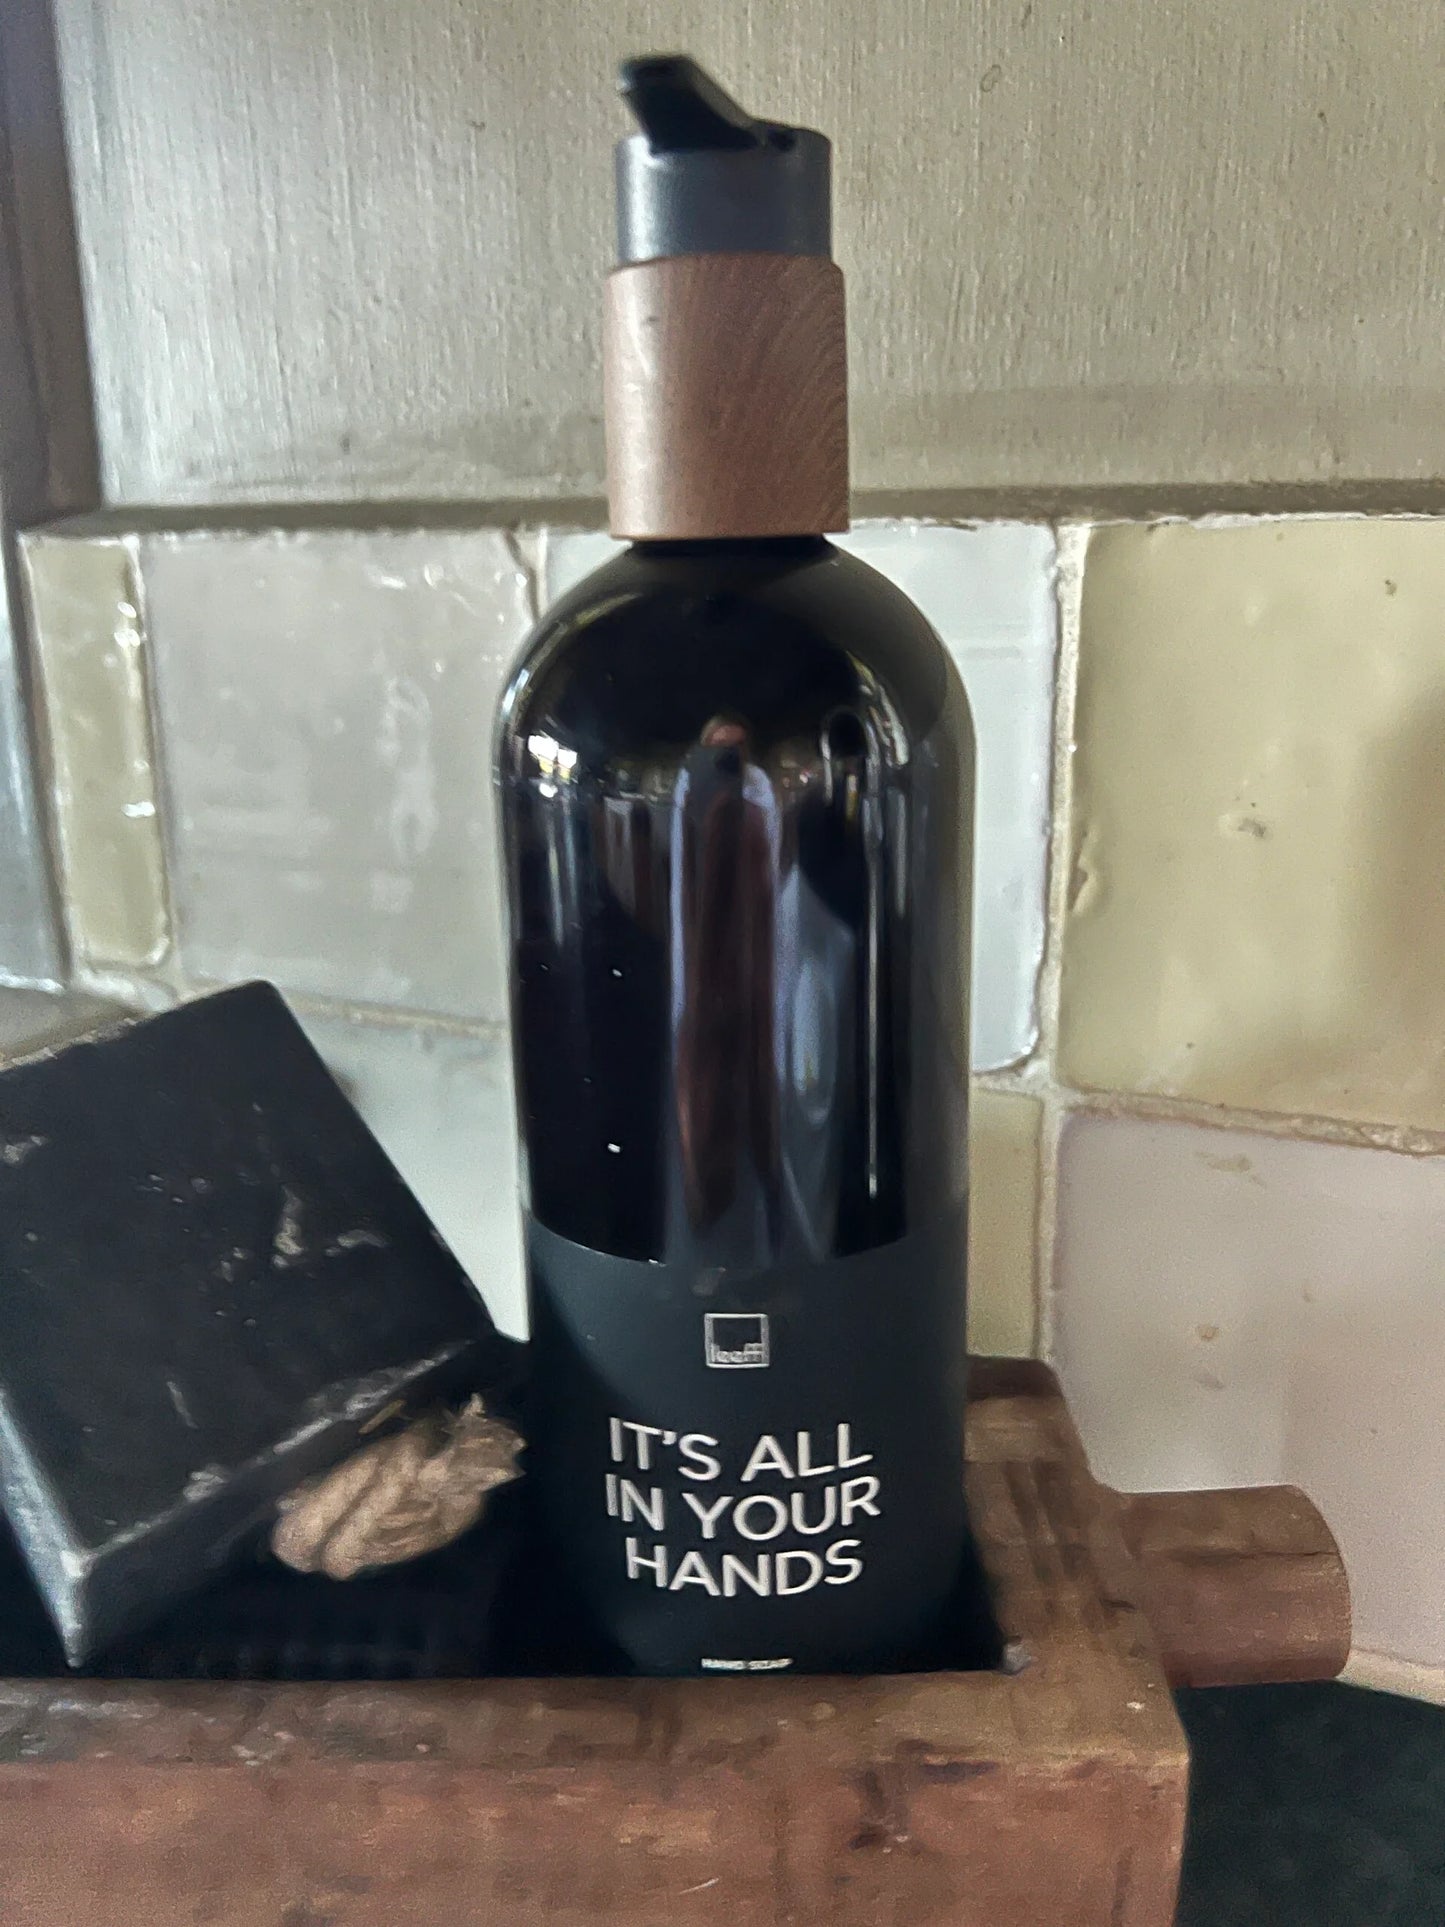 Hand soap "It's all in your hands"